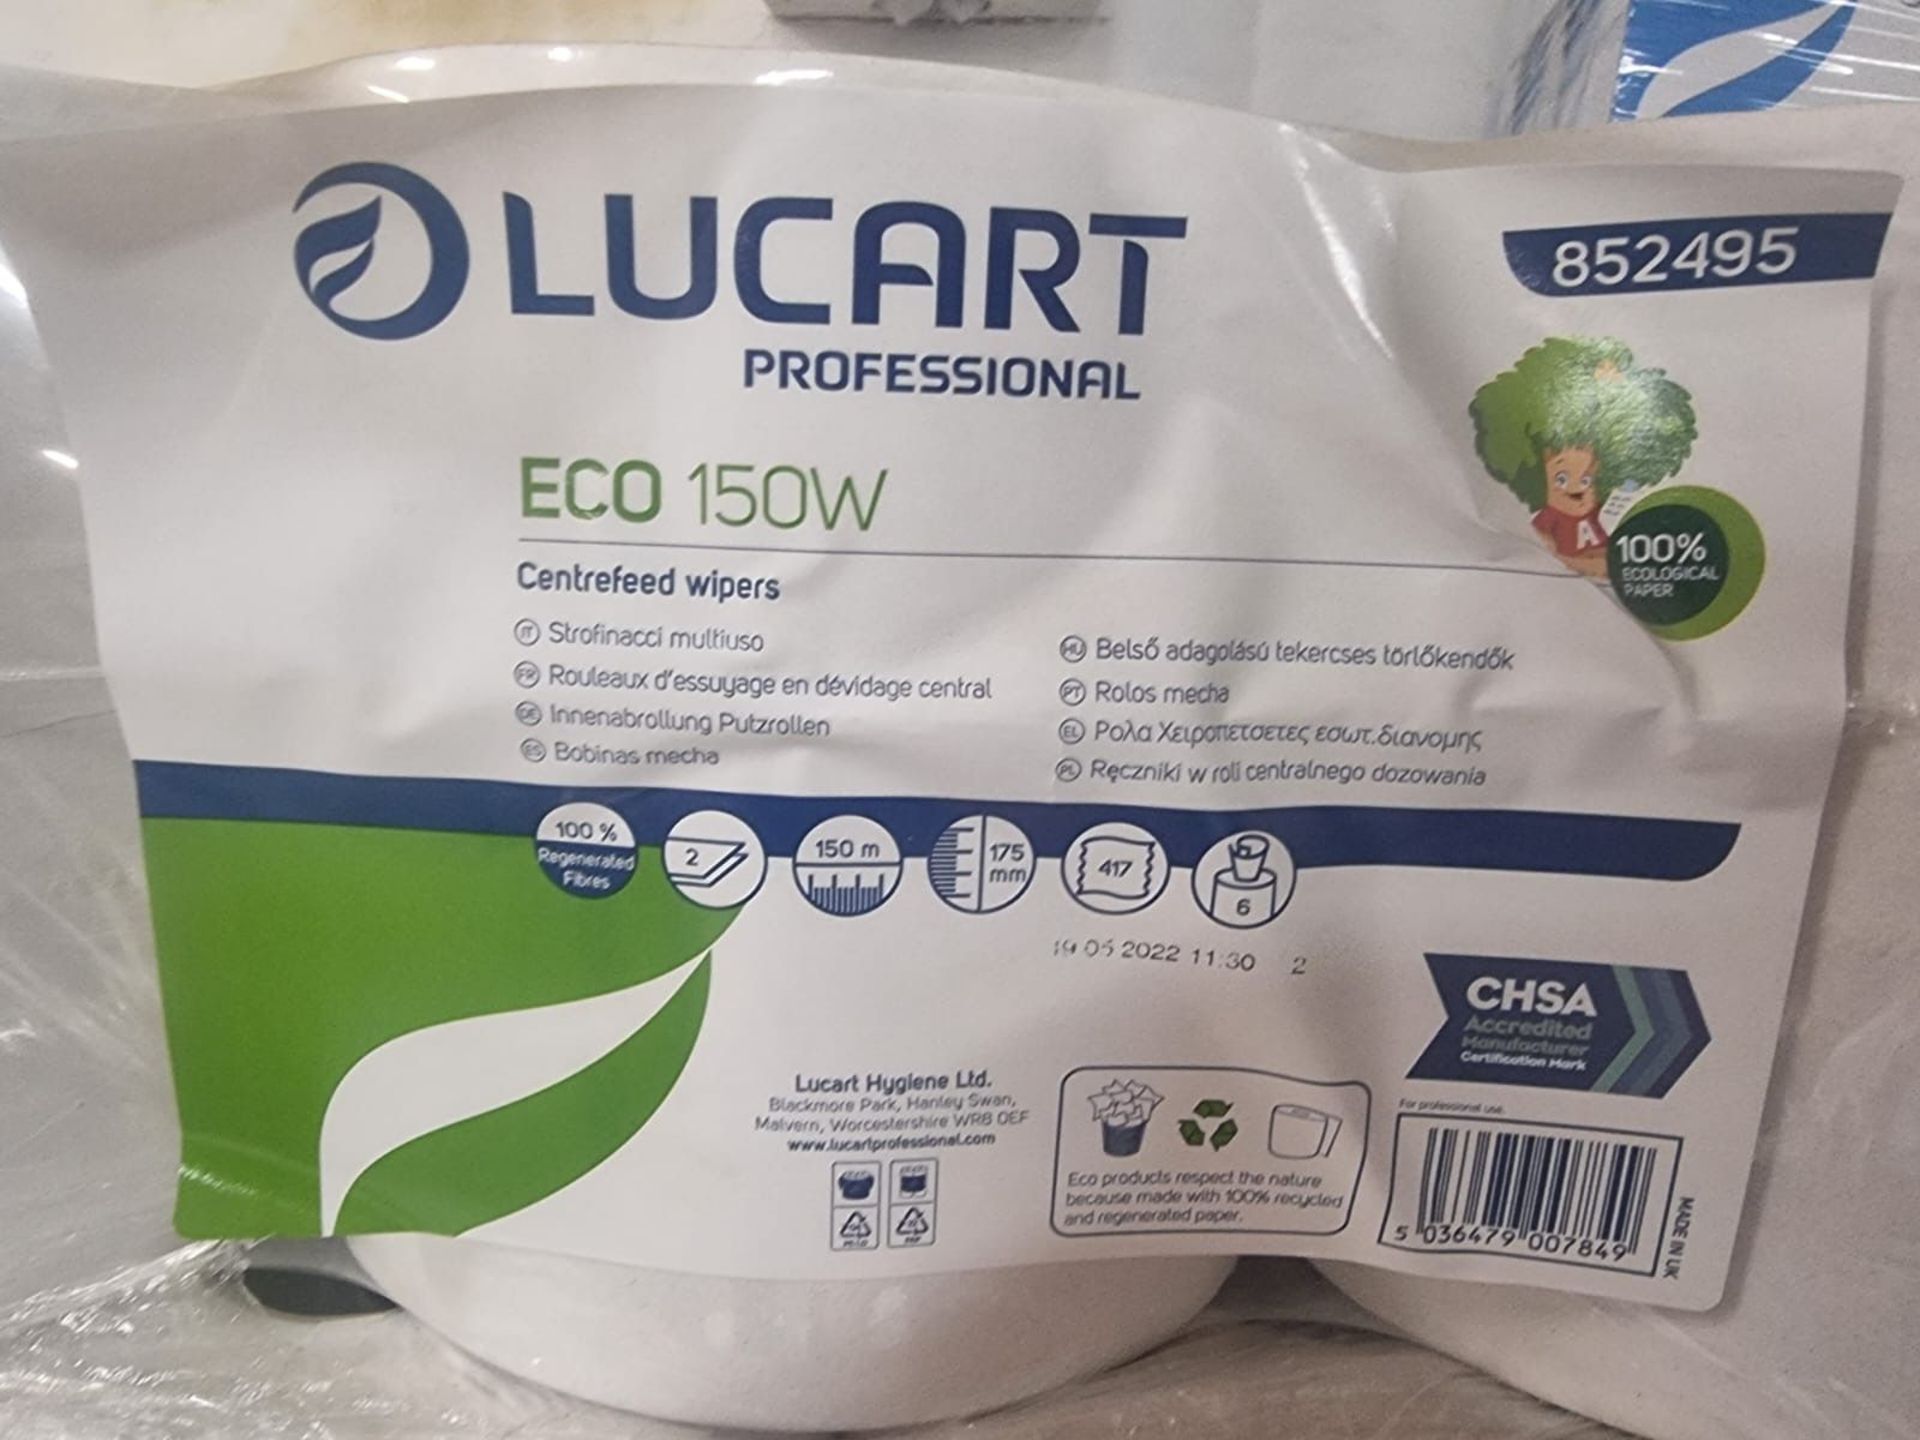 Pallet To Contain 24 x New Packs of 6 Lucart Professional Eco 150W Centrefeed Wipers. 150m x - Image 3 of 3